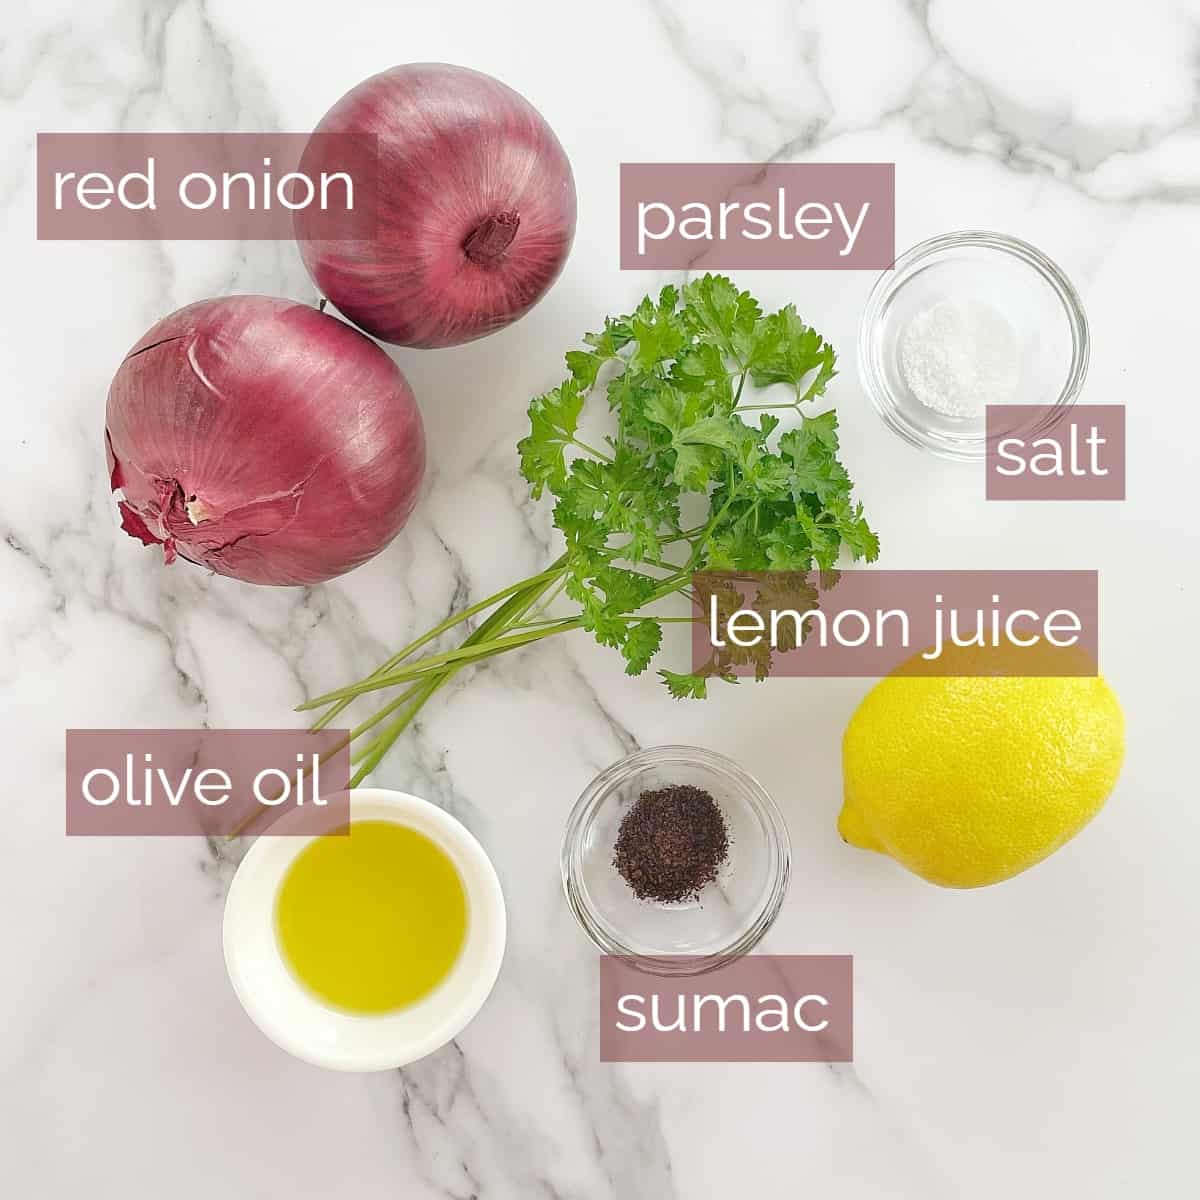 image showing ingredients needed to make this recipe with labels